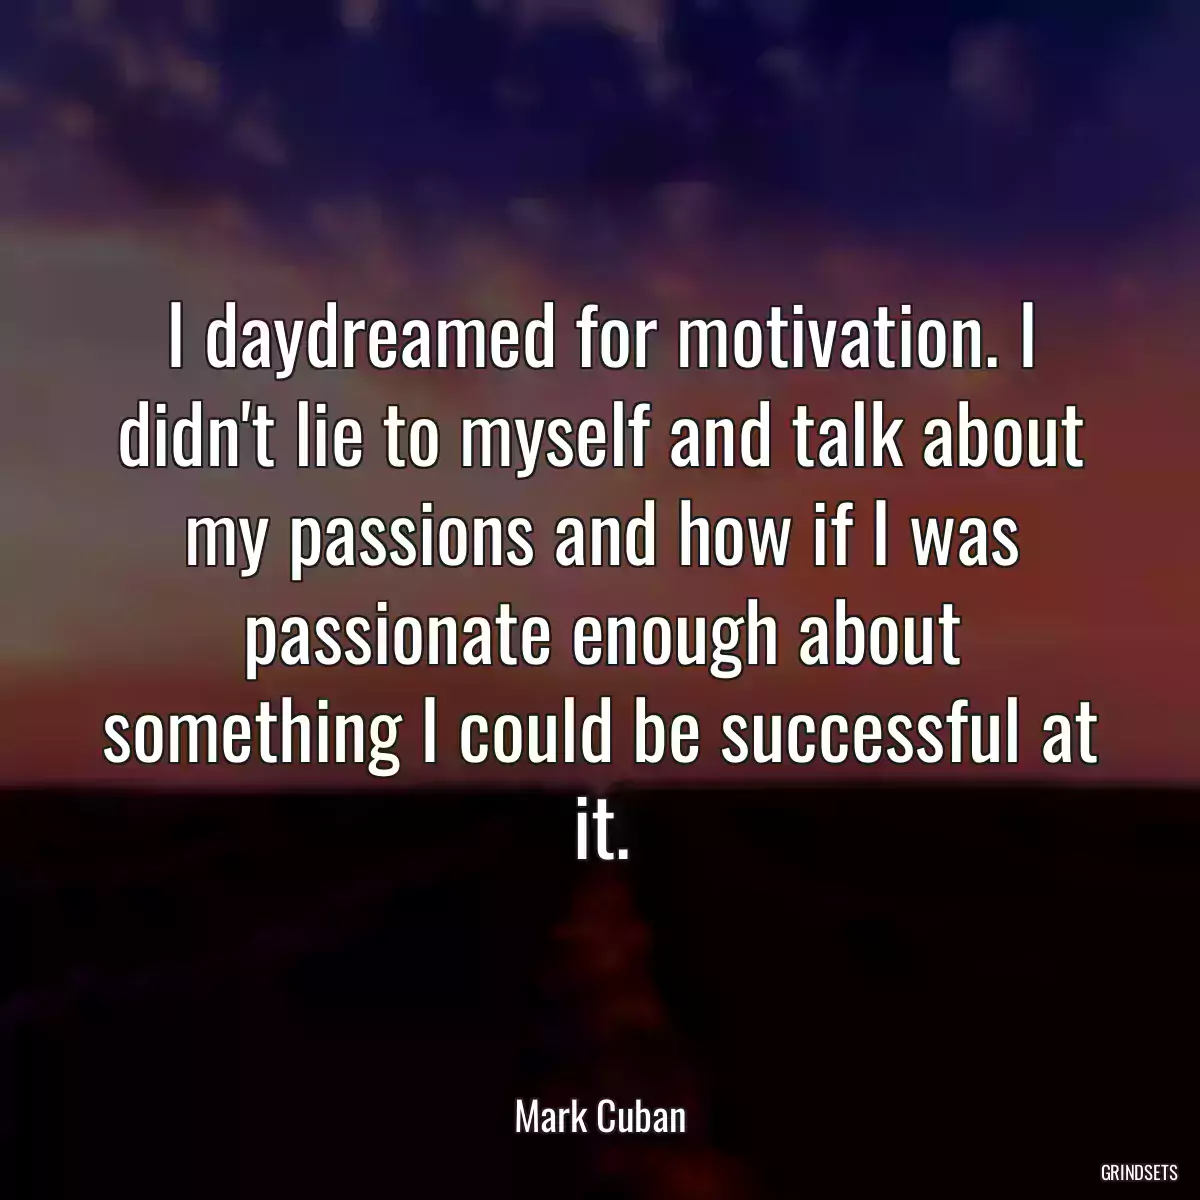 I daydreamed for motivation. I didn\'t lie to myself and talk about my passions and how if I was passionate enough about something I could be successful at it.